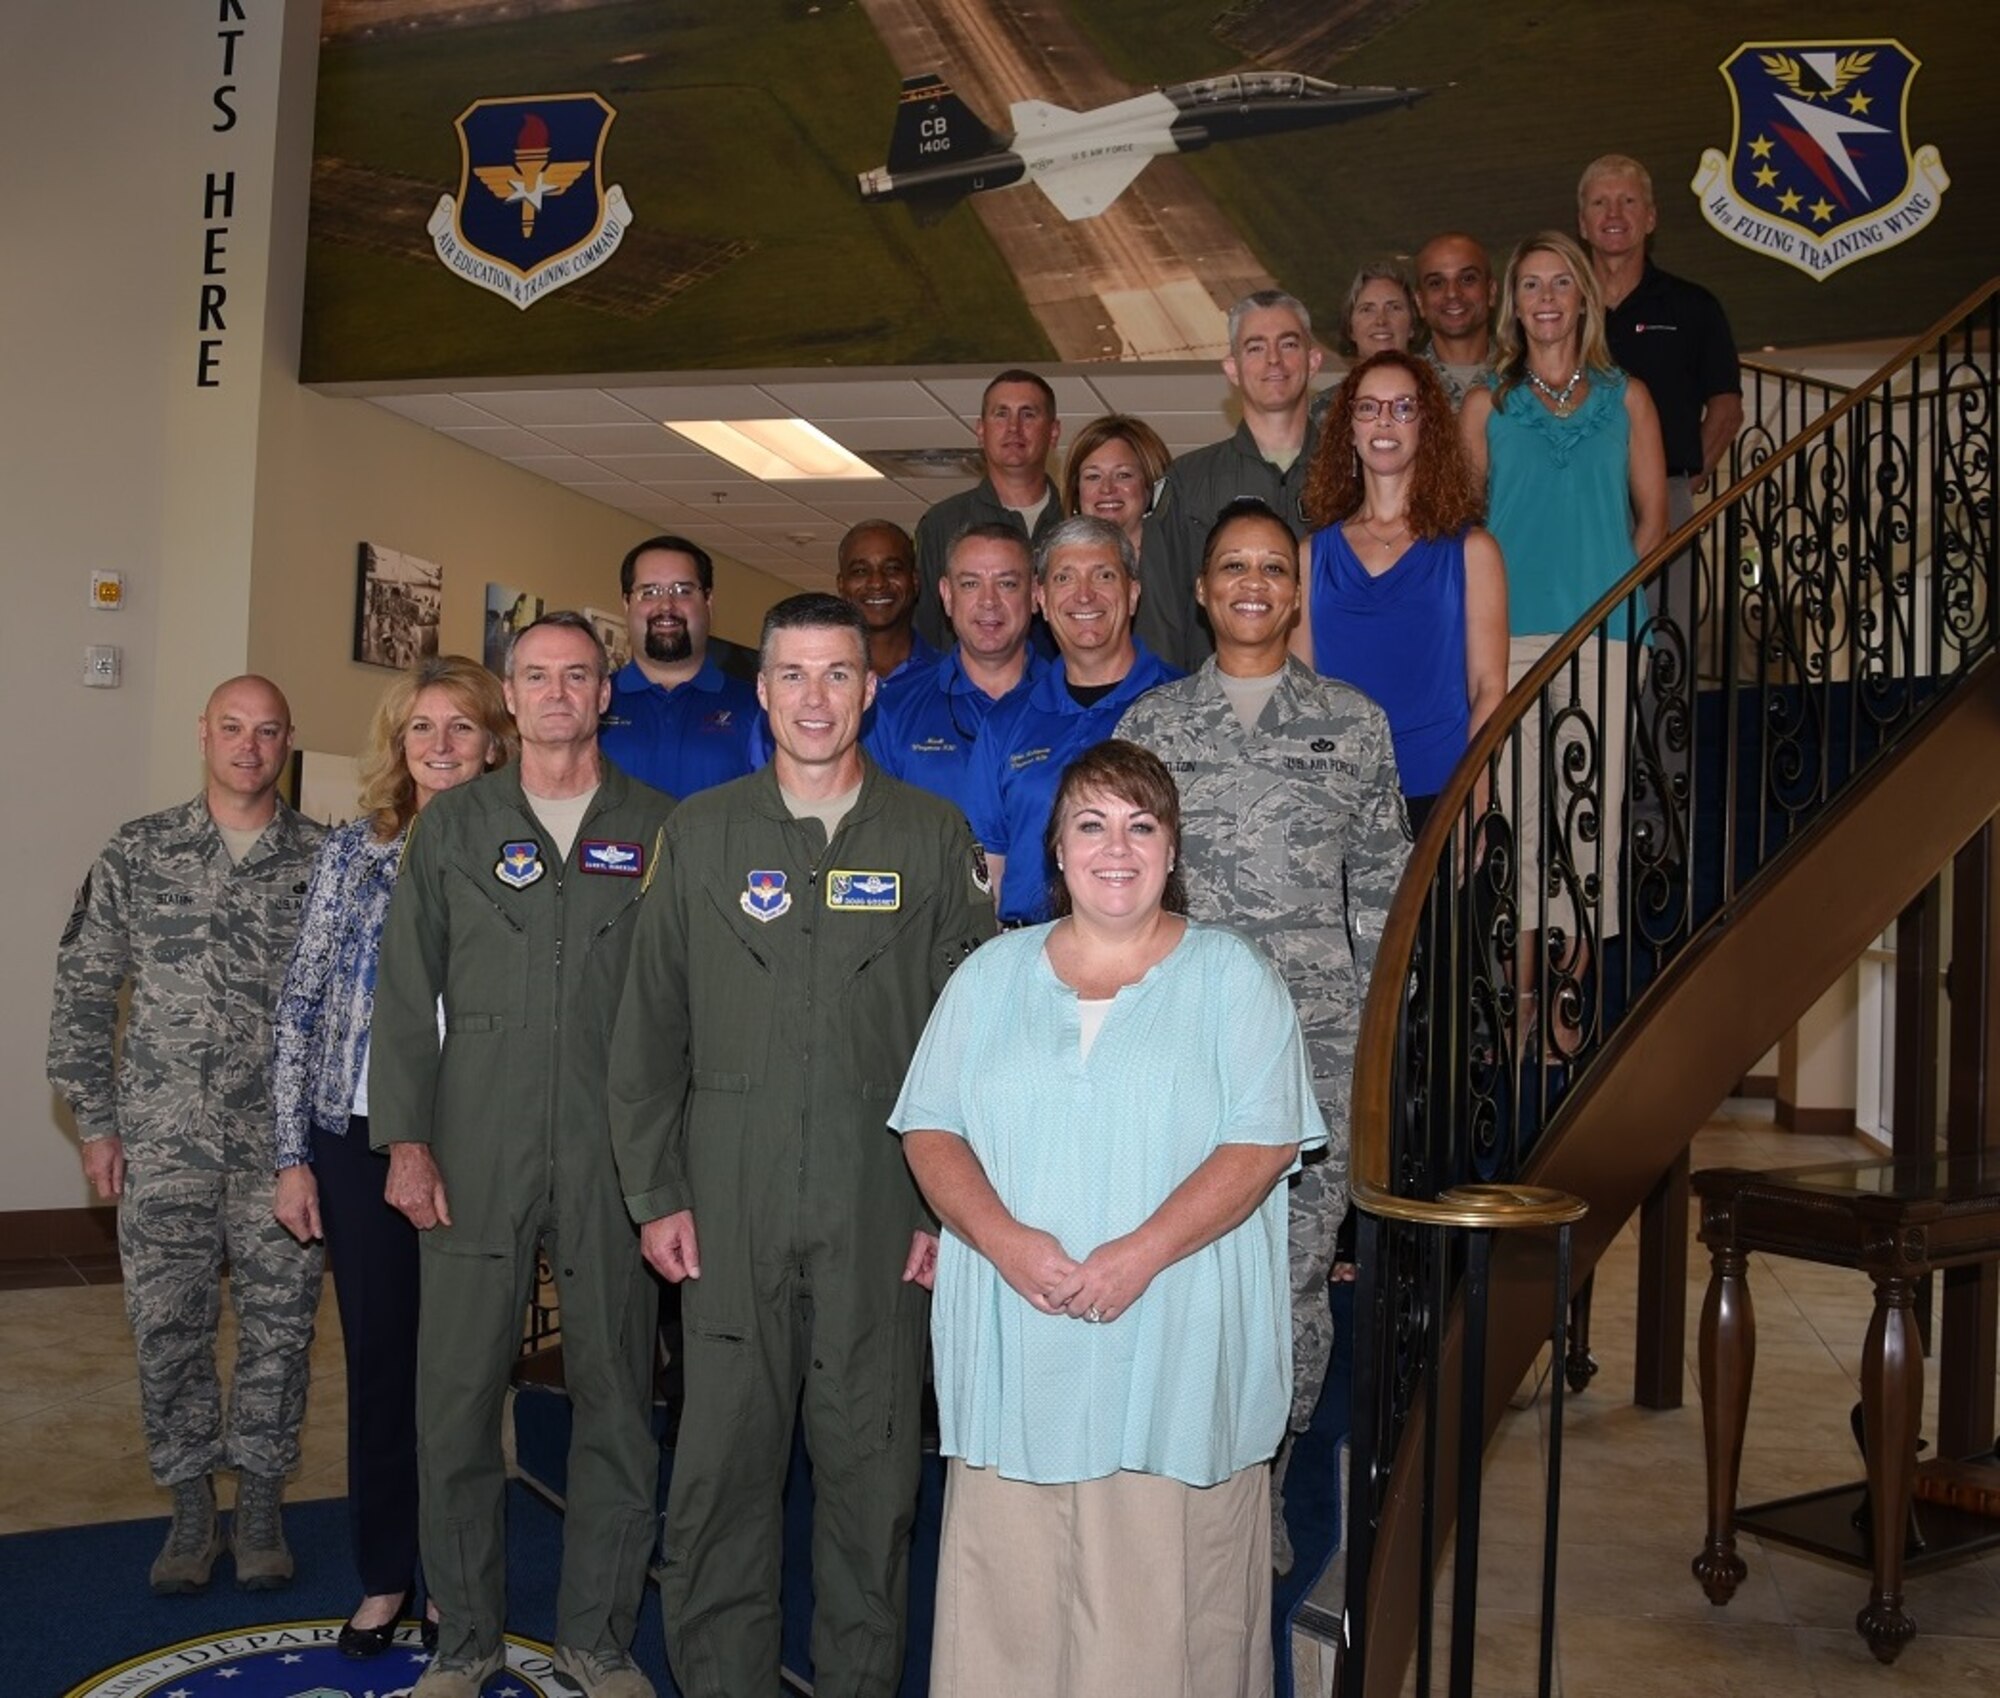 Lt. Gen. Darryl Roberson, commander of Air Education and Training Command, and Mrs. Roberson pause for a photo with Col. Douglas Gosney, 14th Flying Training Wing Commander, Mrs. Gosney, Columbus Air Force Base leaders and Columbus community members Sept. 12, 2016. During his visit, Roberson toured base facilities, met with Airmen, and held an all-call to discuss AETC hot topics. (U.S. Air Force photo/Elizabeth Owens)